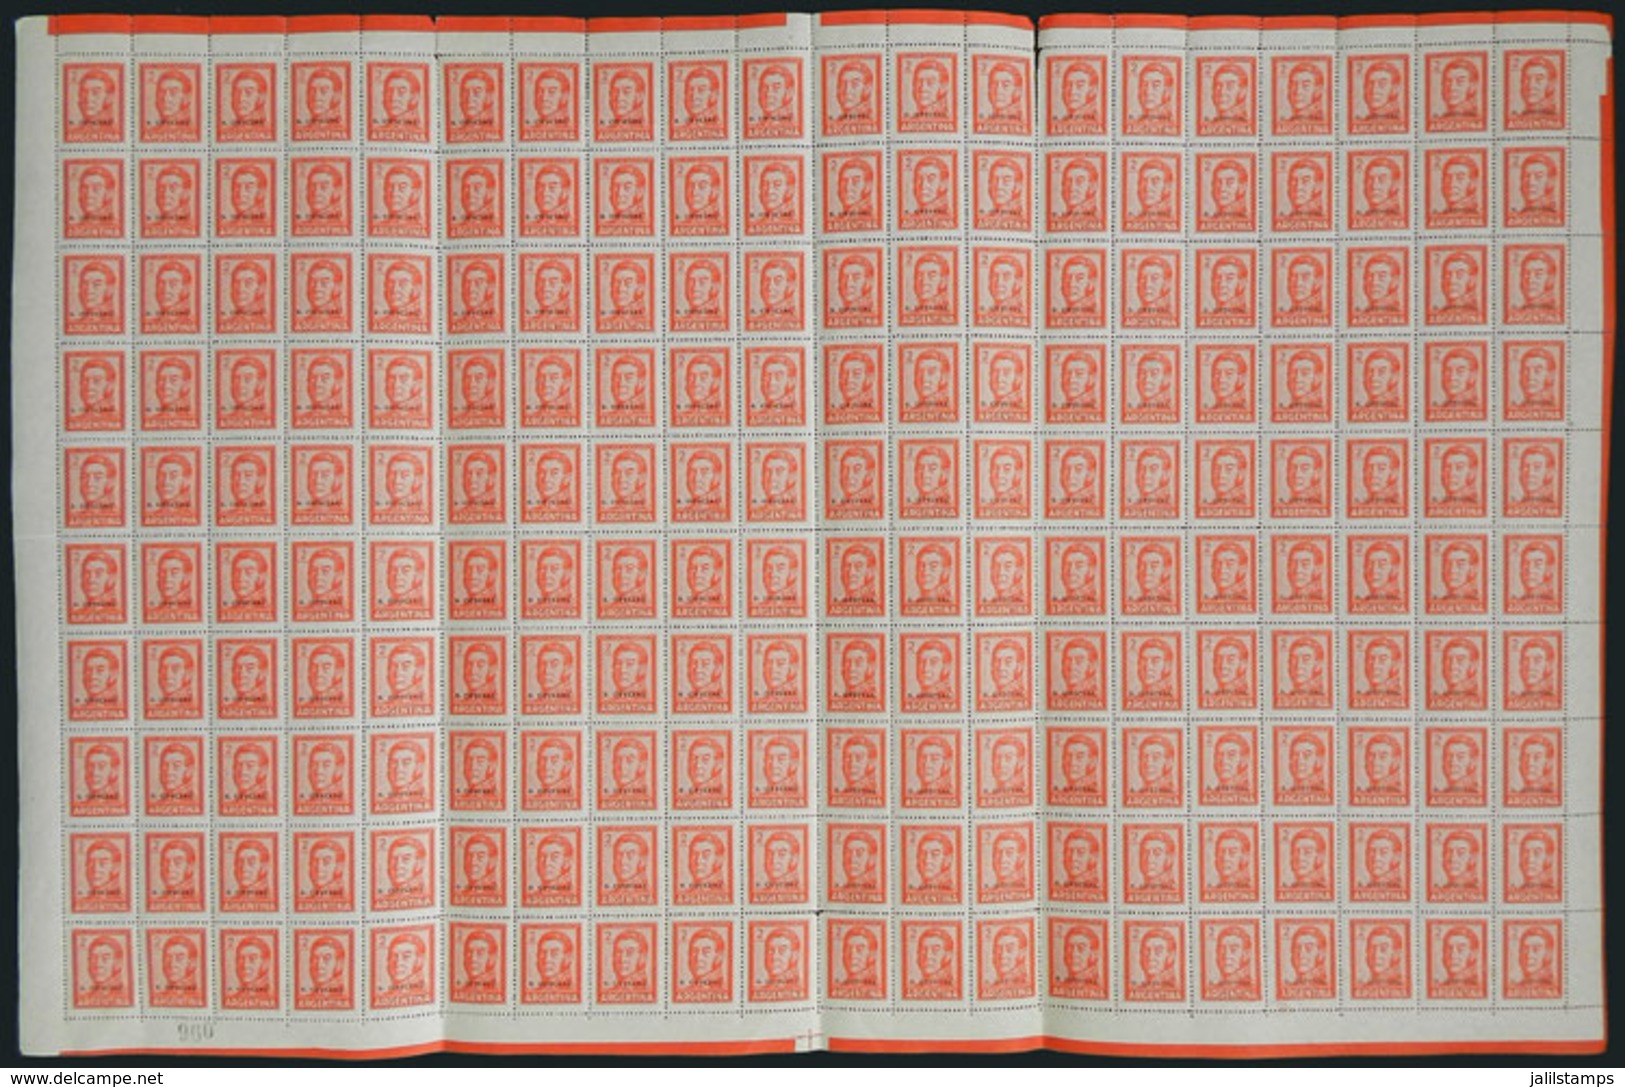 290 ARGENTINA: GJ.743, 2P. San Martín, Rare Sheet Of 200 Stamps, MNH, VF Quality (a Few Examples With Minor Defect, Norm - Service